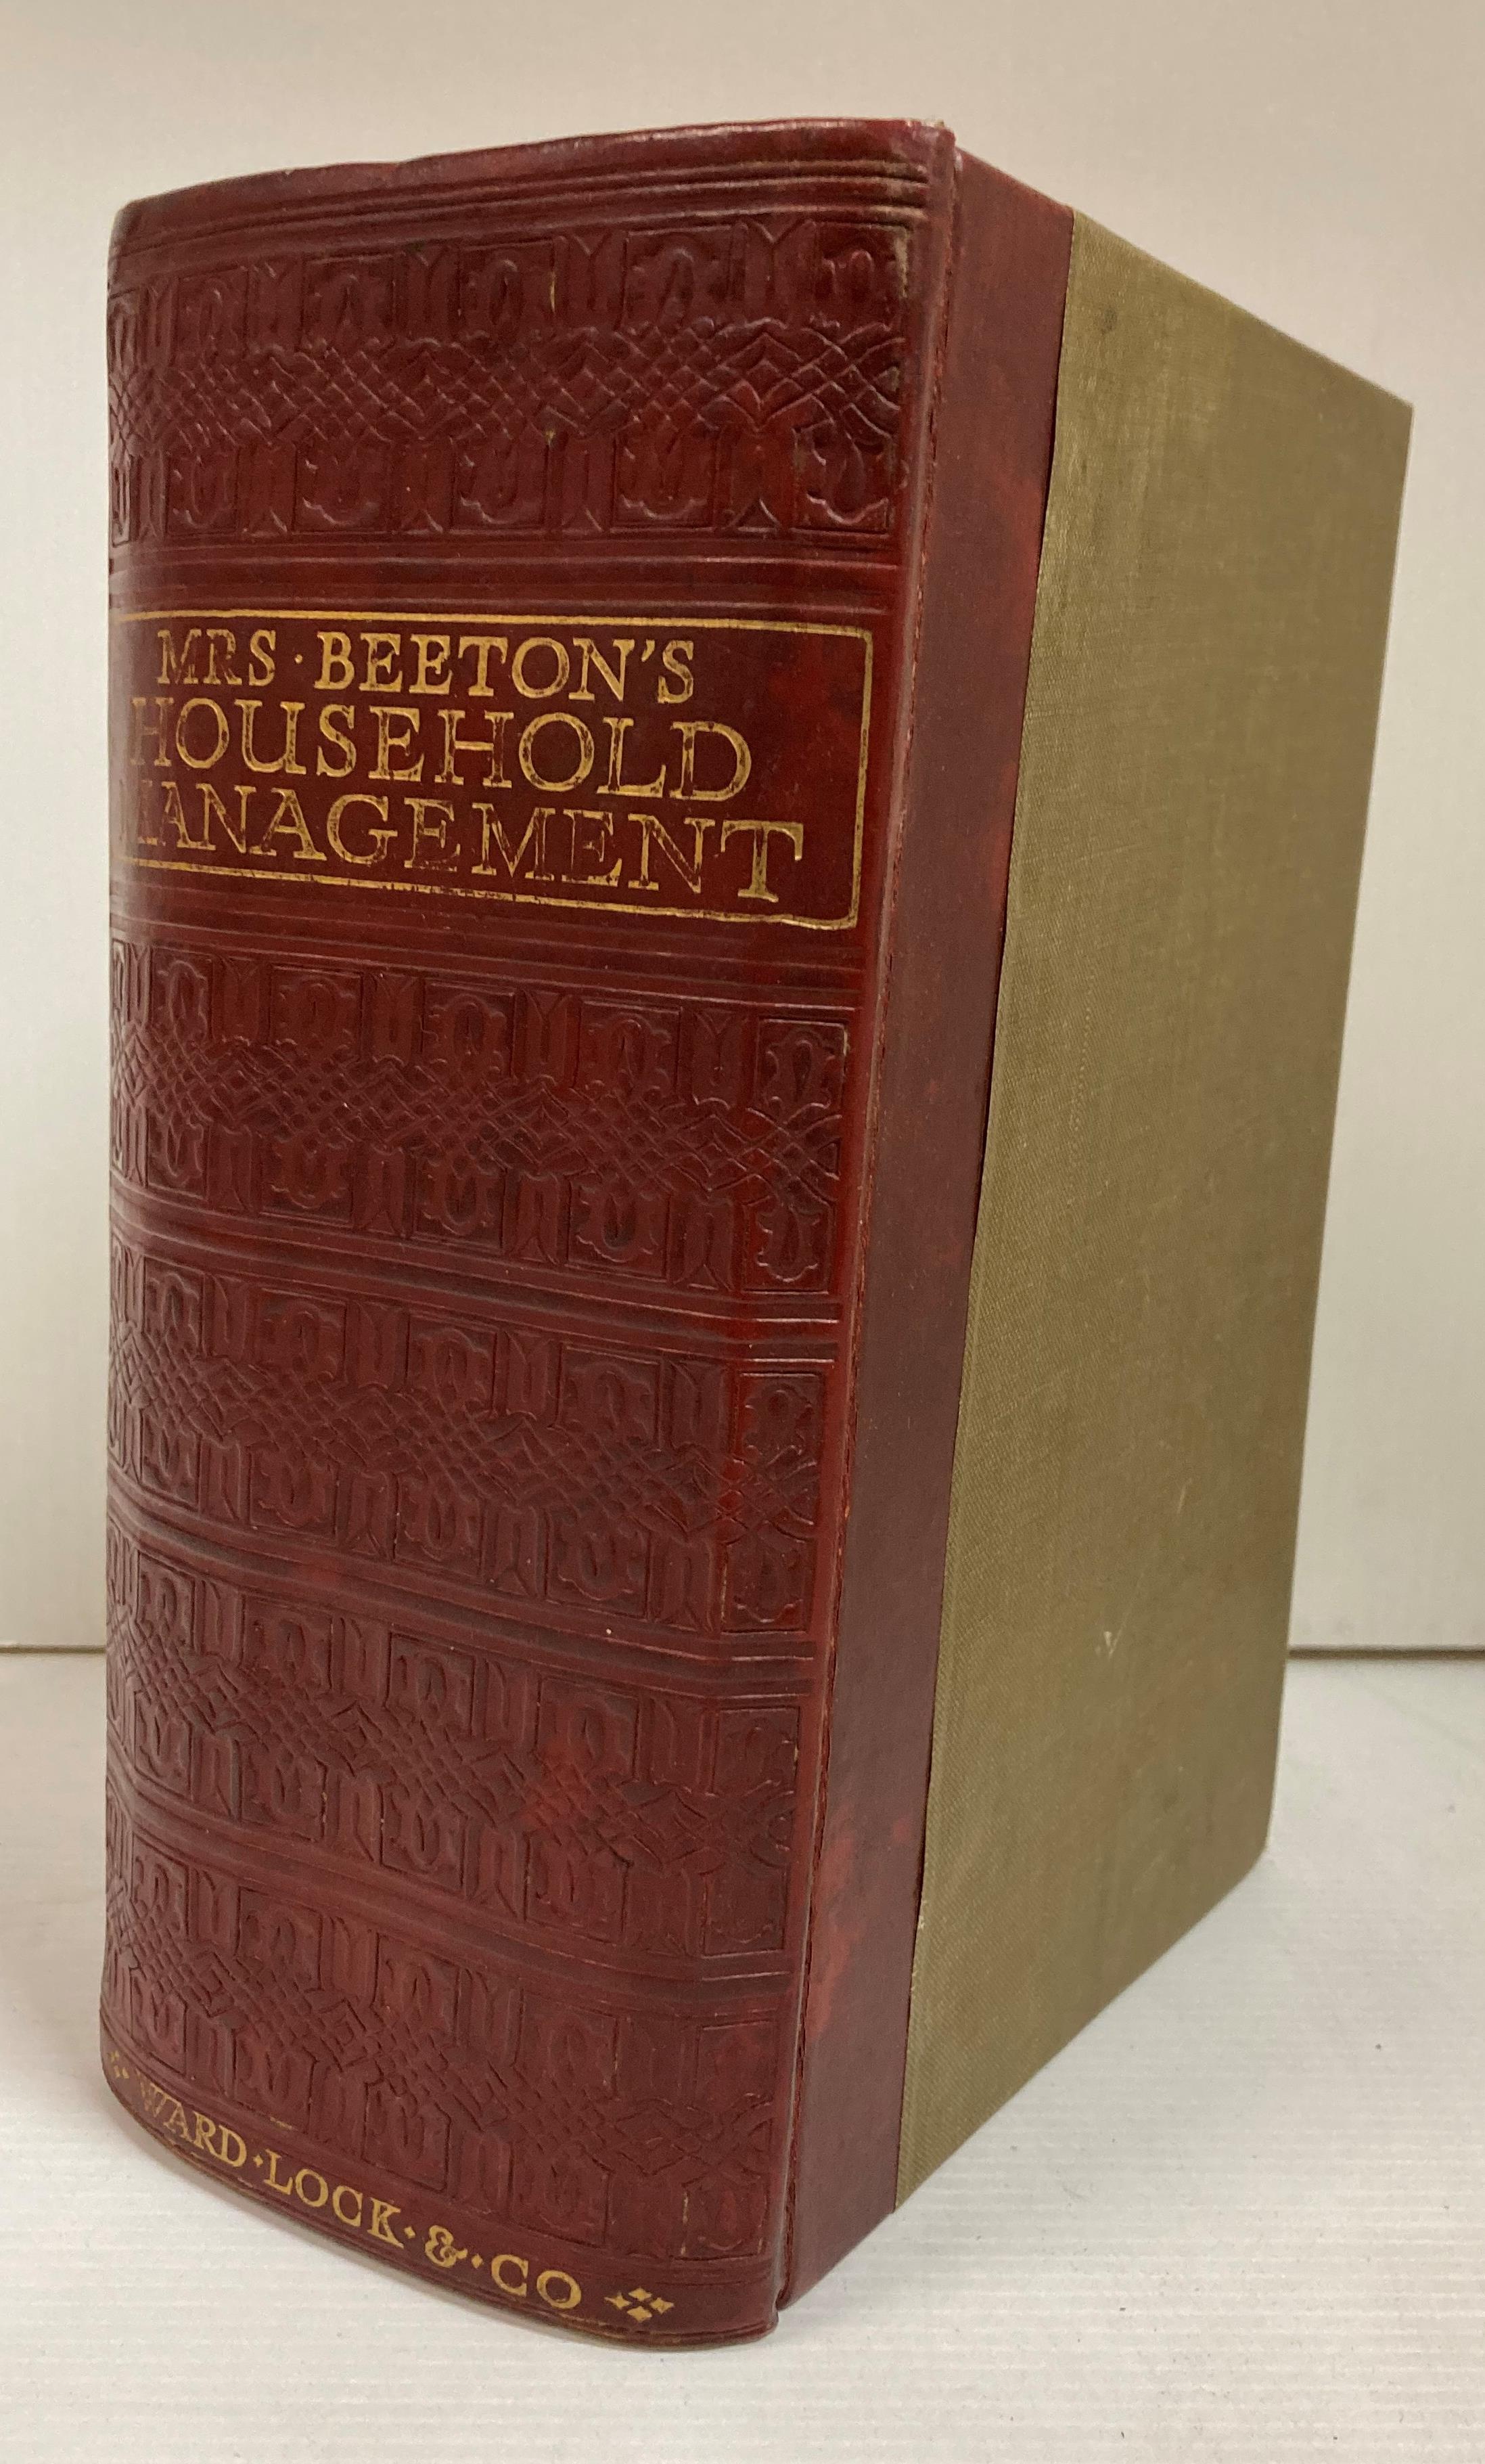 Mrs Beeton's Household Management complete cookery book New Edition published by Ward Lock and Co